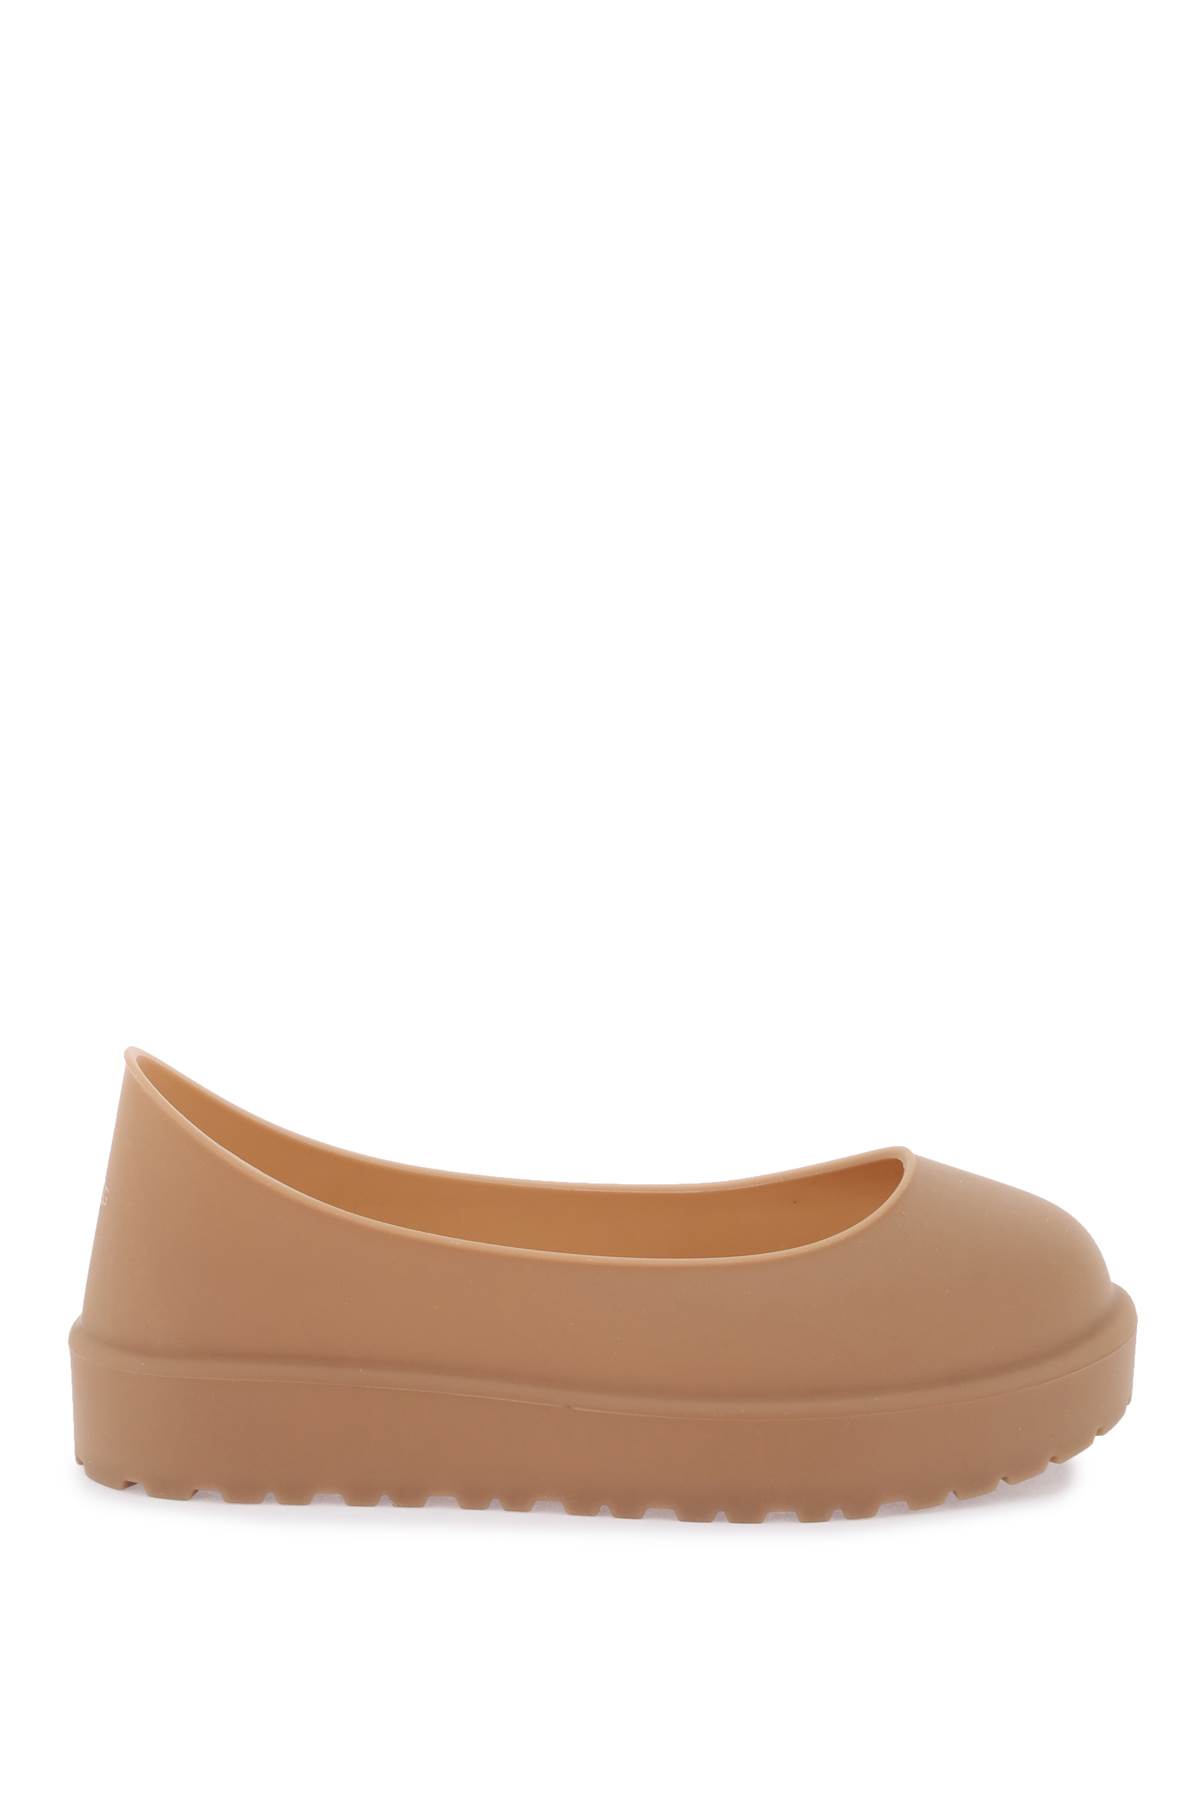 Ugg Guard Shoe Protection In Beige